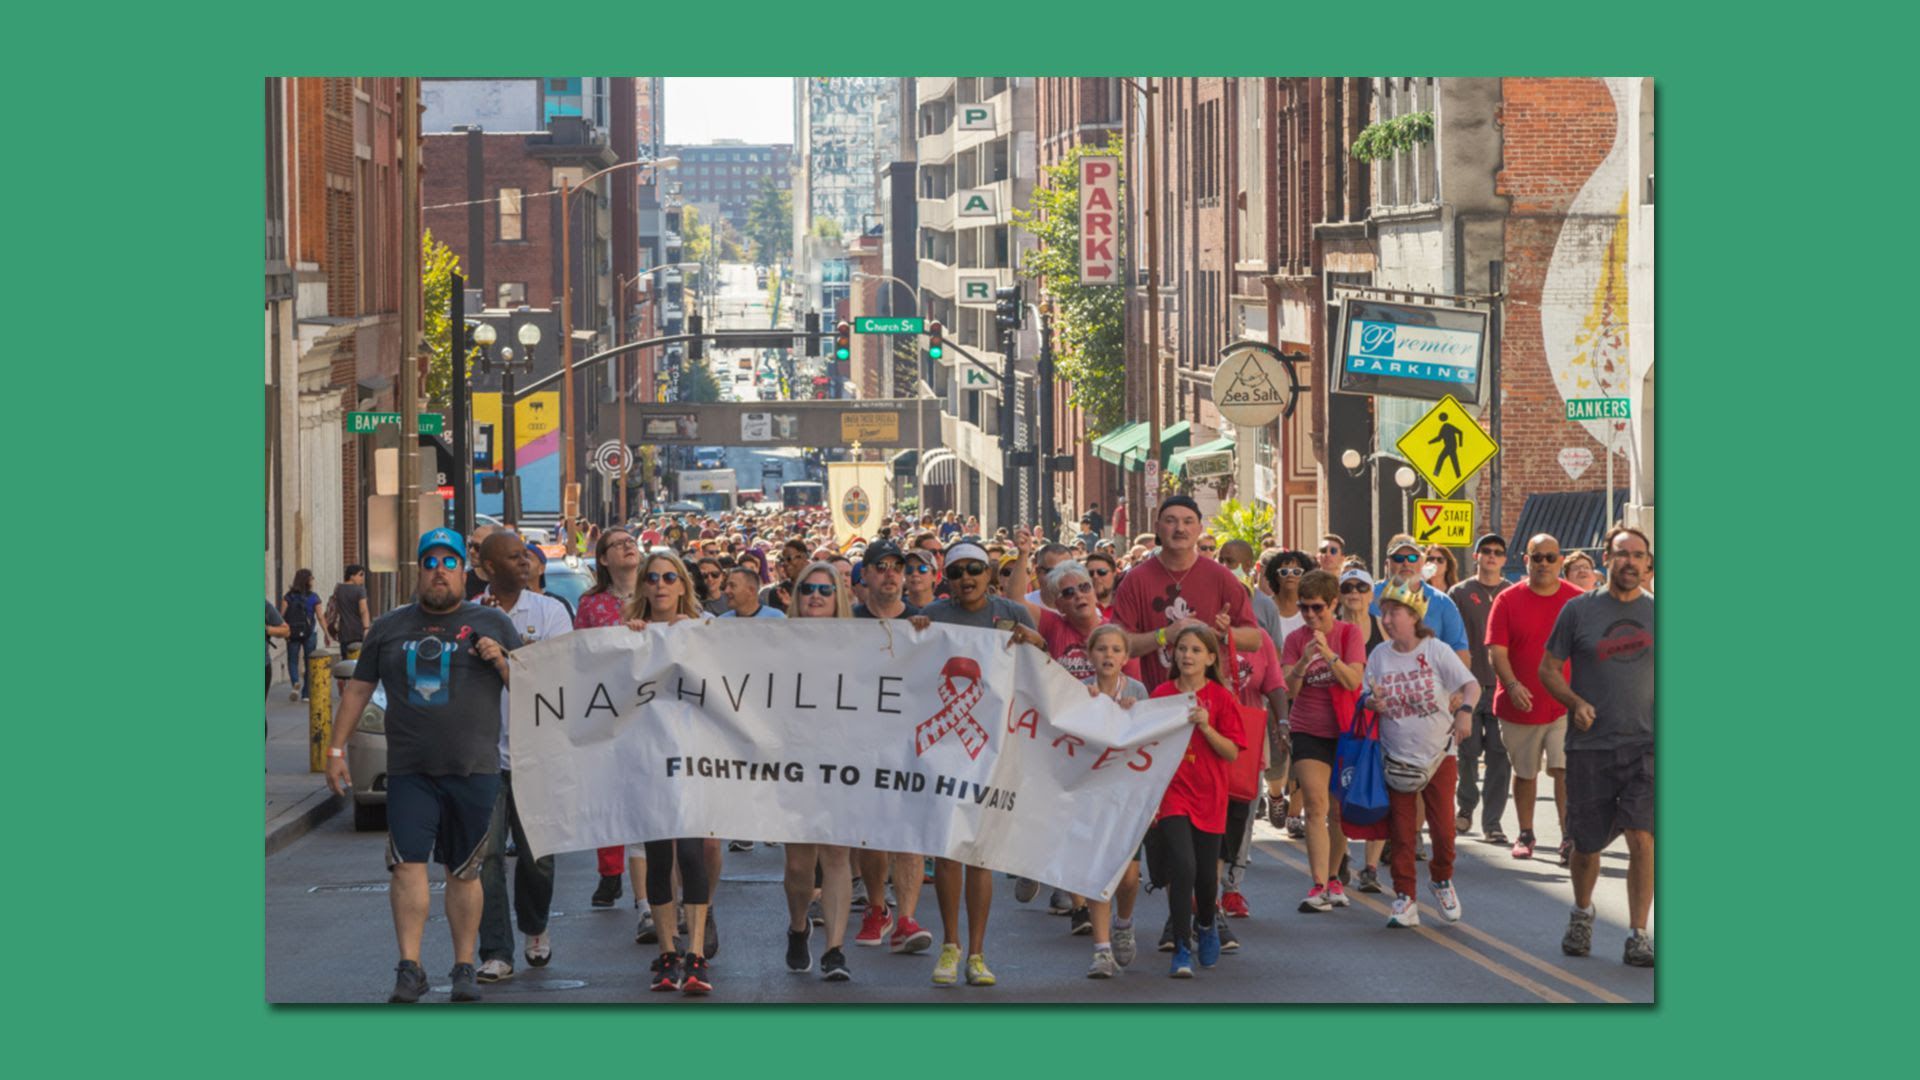 A group of people walking a previous Nashville AIDS Walk while holding a banner.